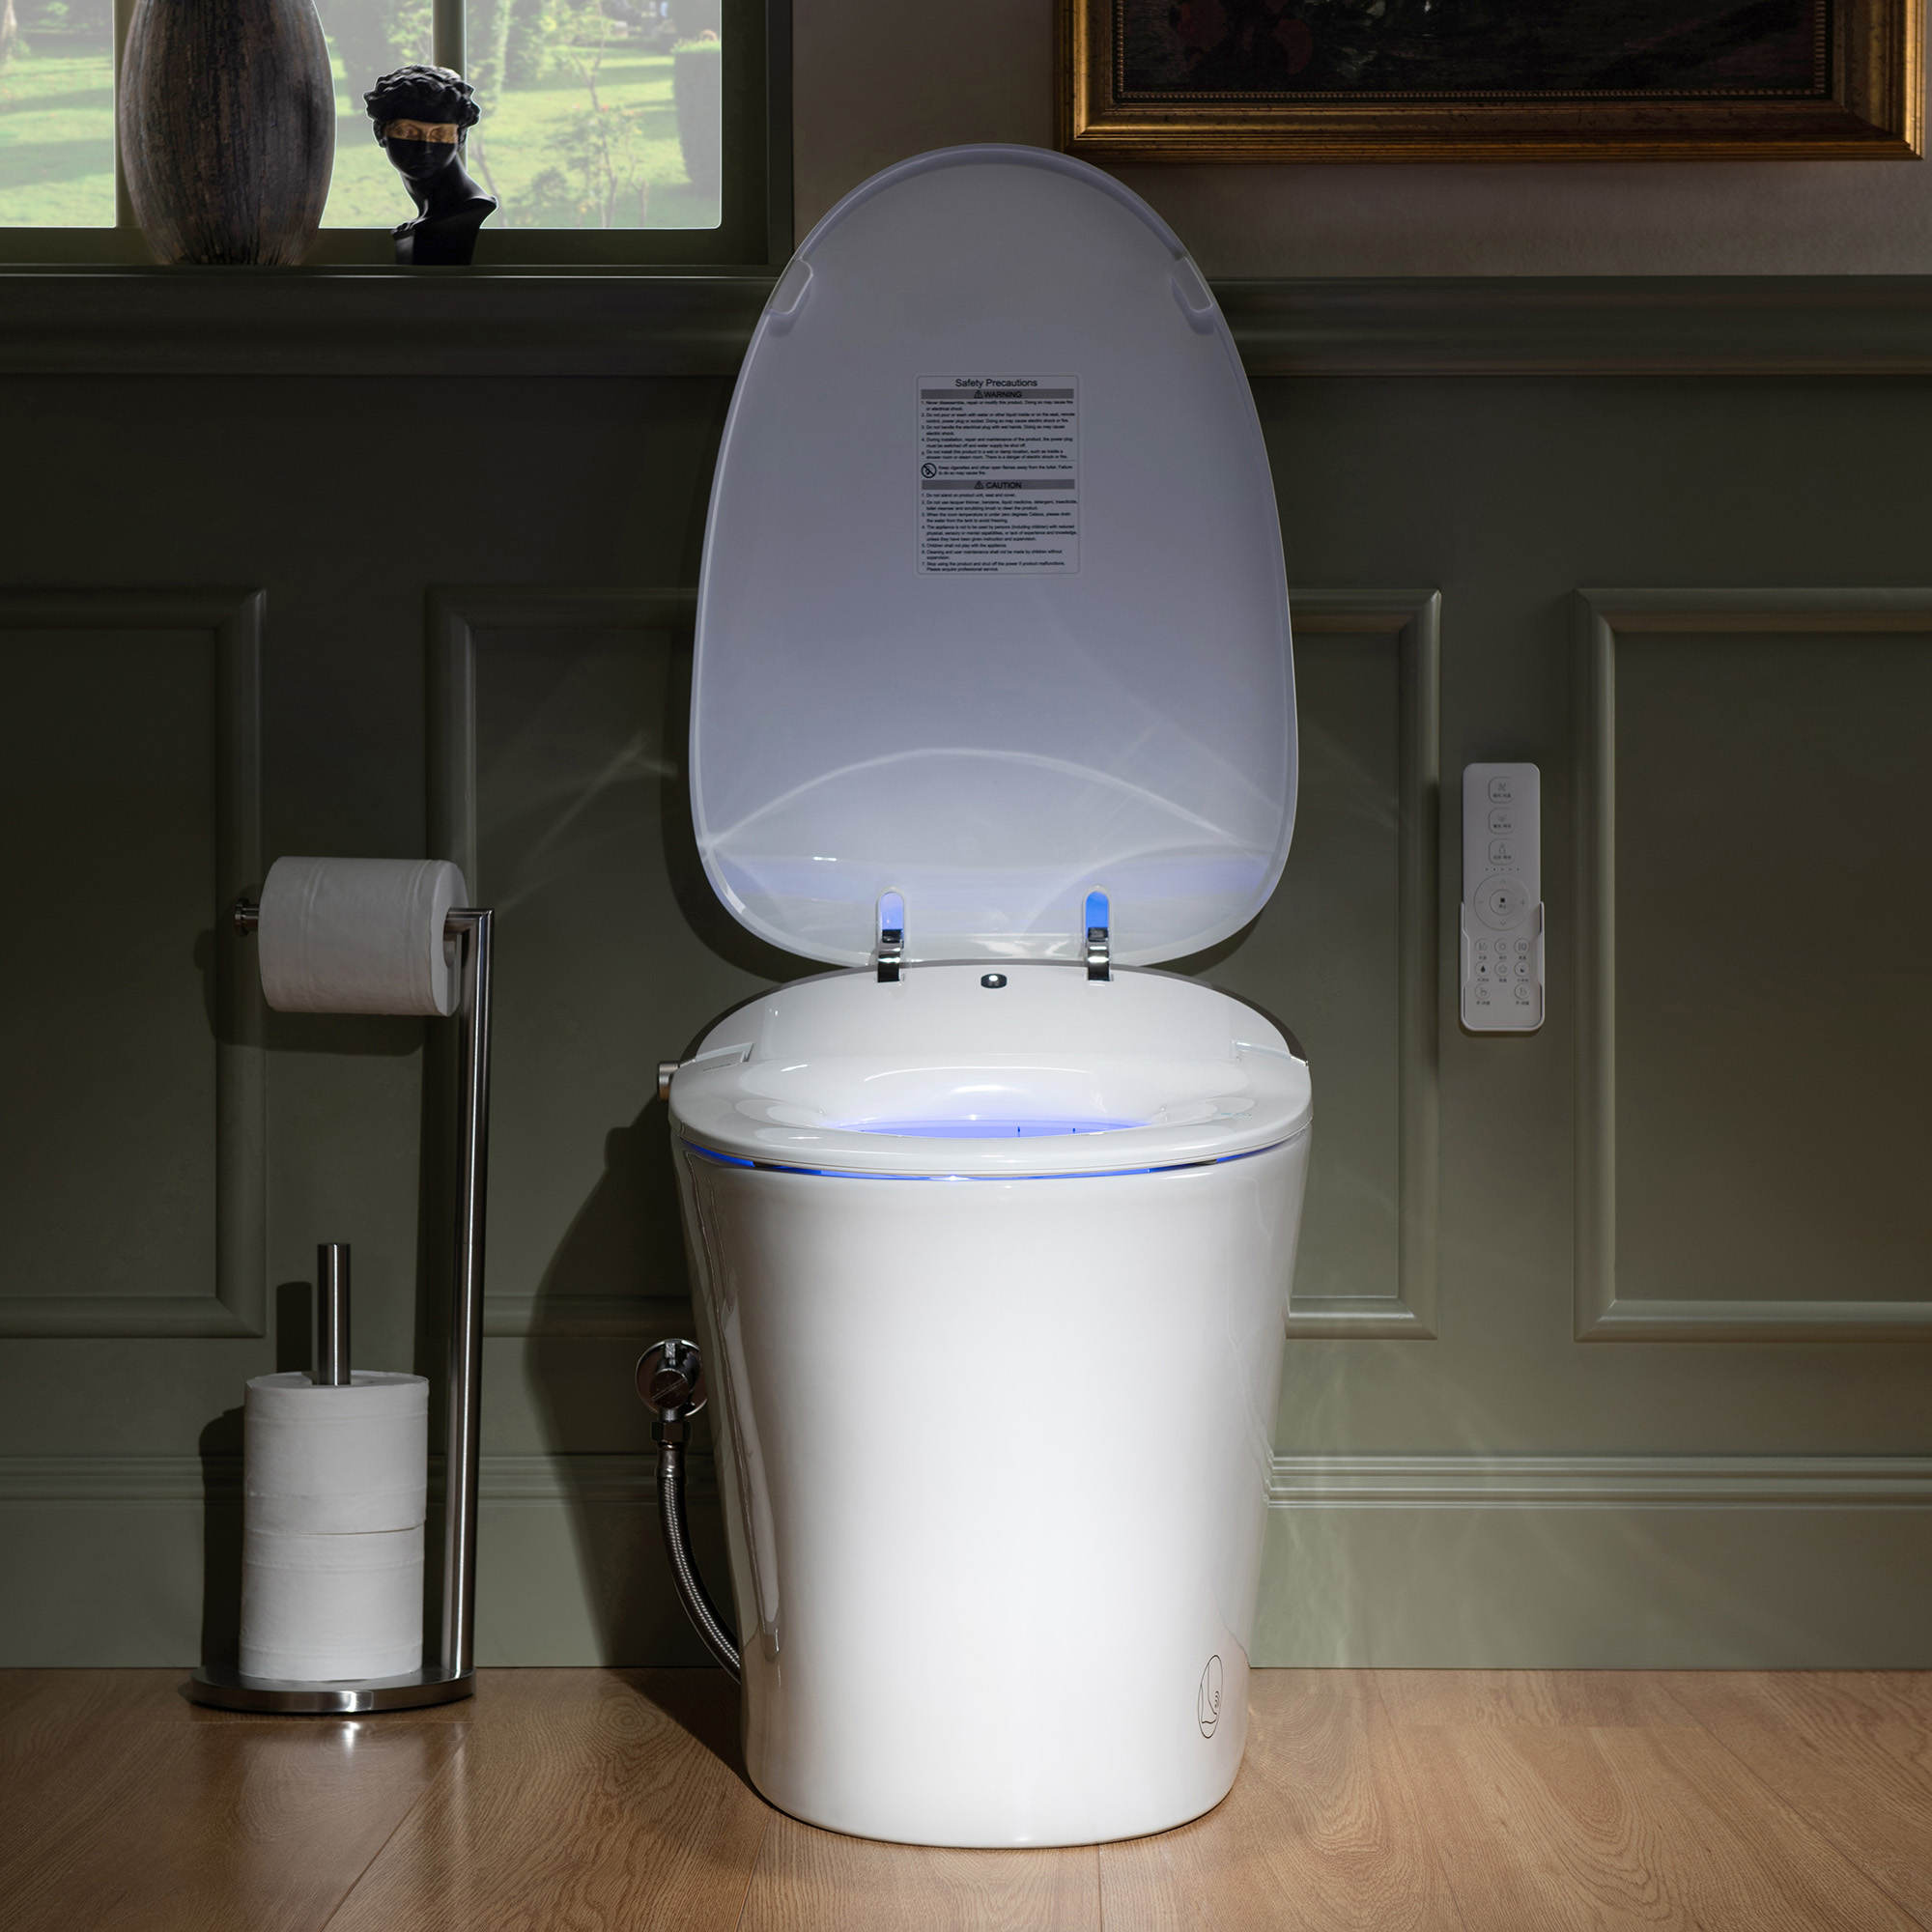  WOODBRIDGE LT610 One Piece Elongated Smart Toilet Bidet with Massage Washing, Auto Open and Close Seat and Lid, Auto Flush, Heated Seat and Integrated Multi Function Remote Control, White_11627